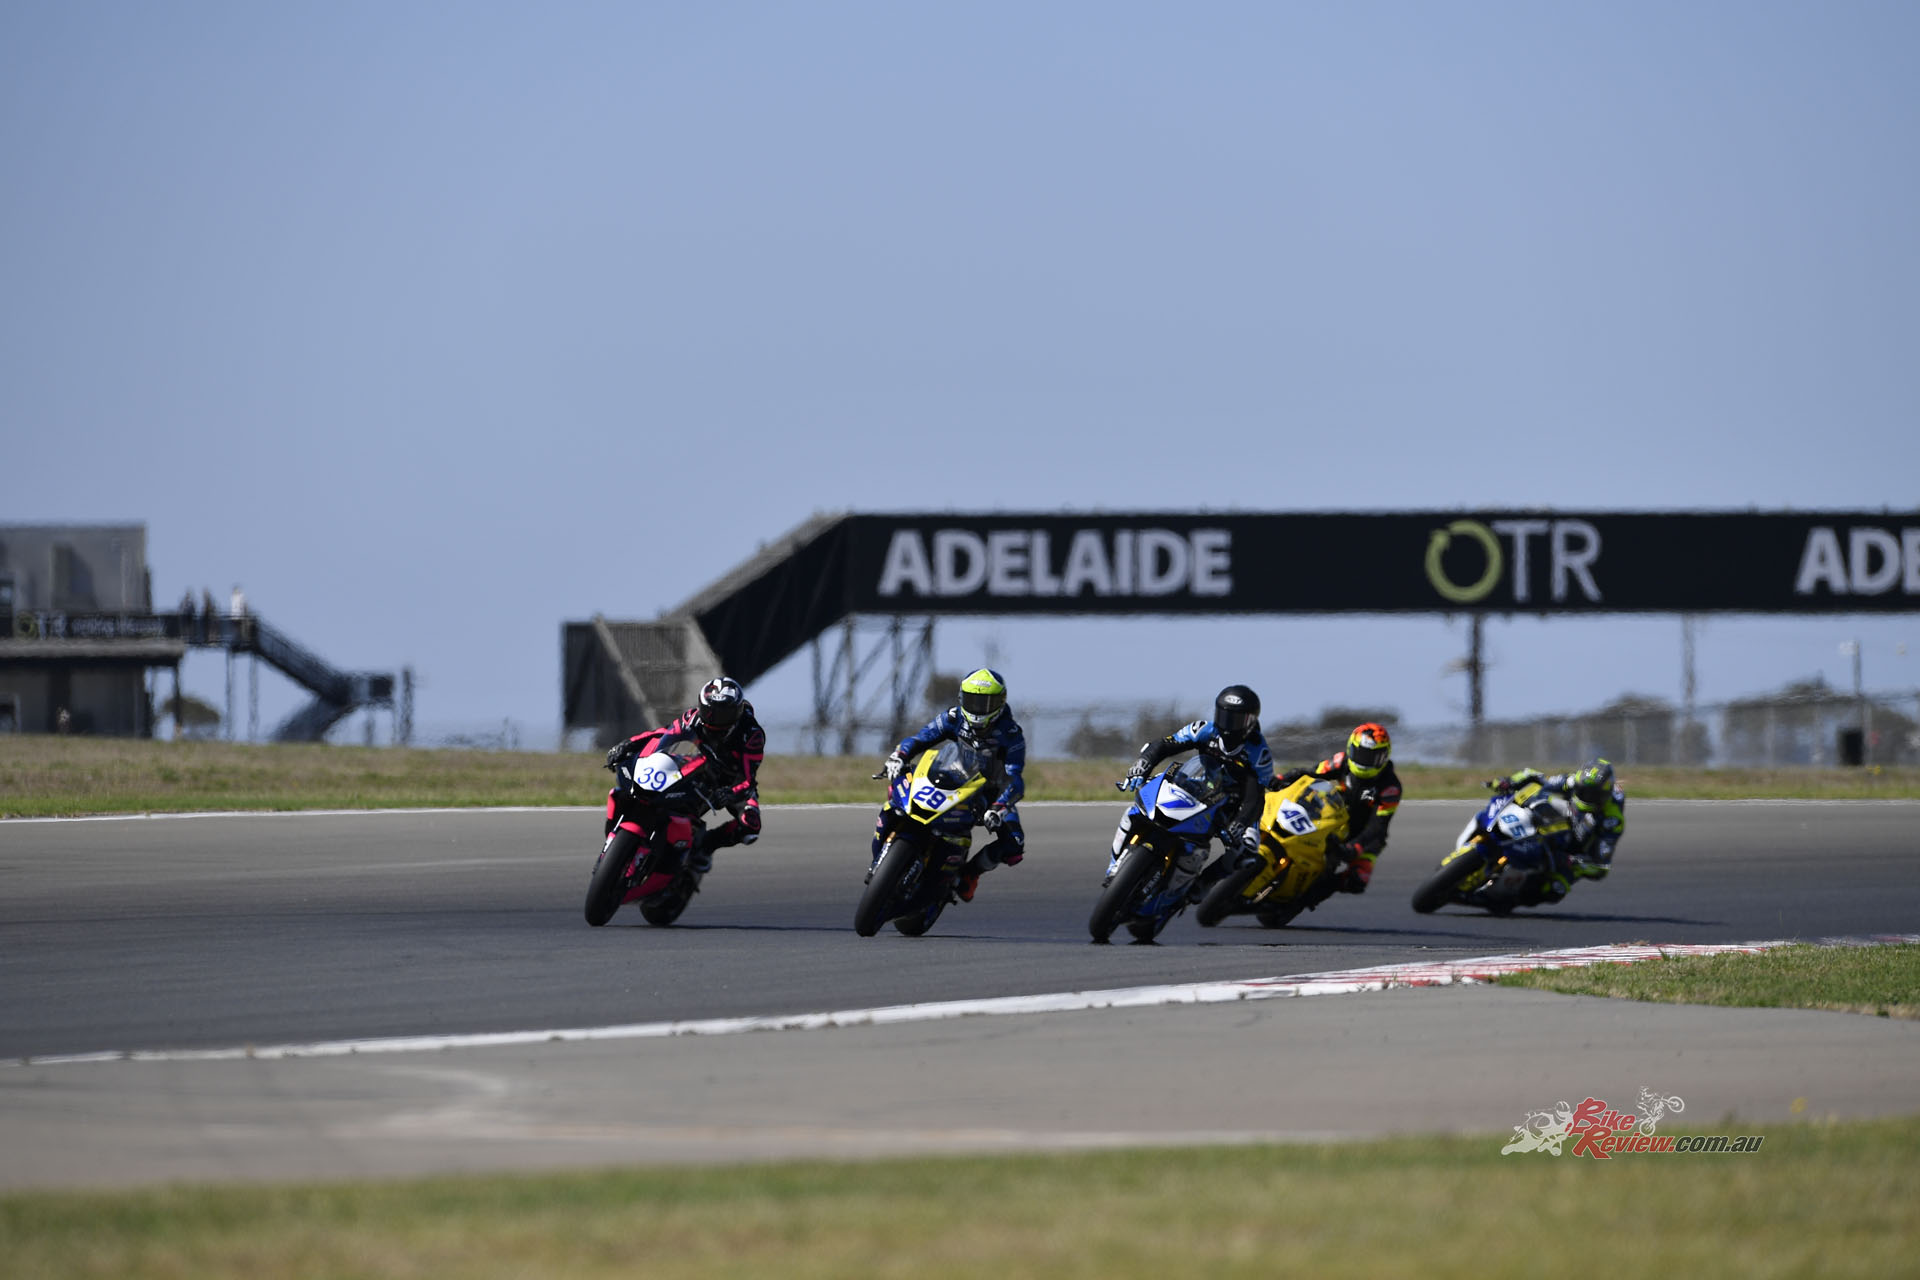 The final race of the year was almost a mirror image of the opener as Simpson and Voight diced with each other and Dunker eventually settled into fourth behind Jonathan Nahlous (Complete AV YZF-R6) to wrap up the championship.